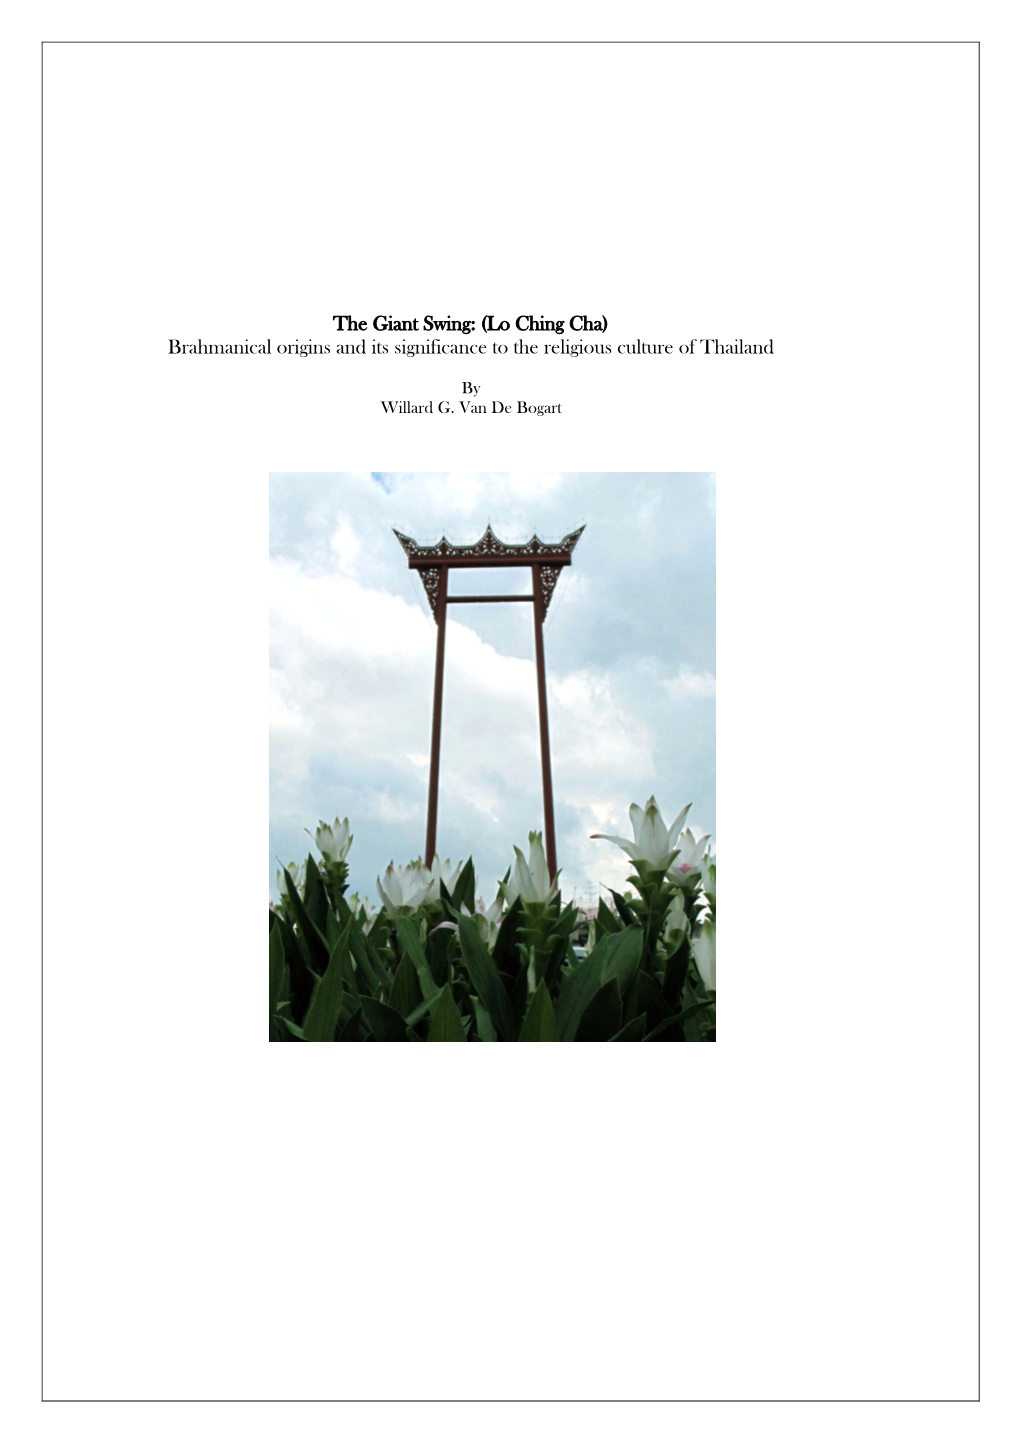 The Giant Swing: (Lo Ching Cha) Brahmanical Origins and Its Significance to the Religious Culture of Thailand